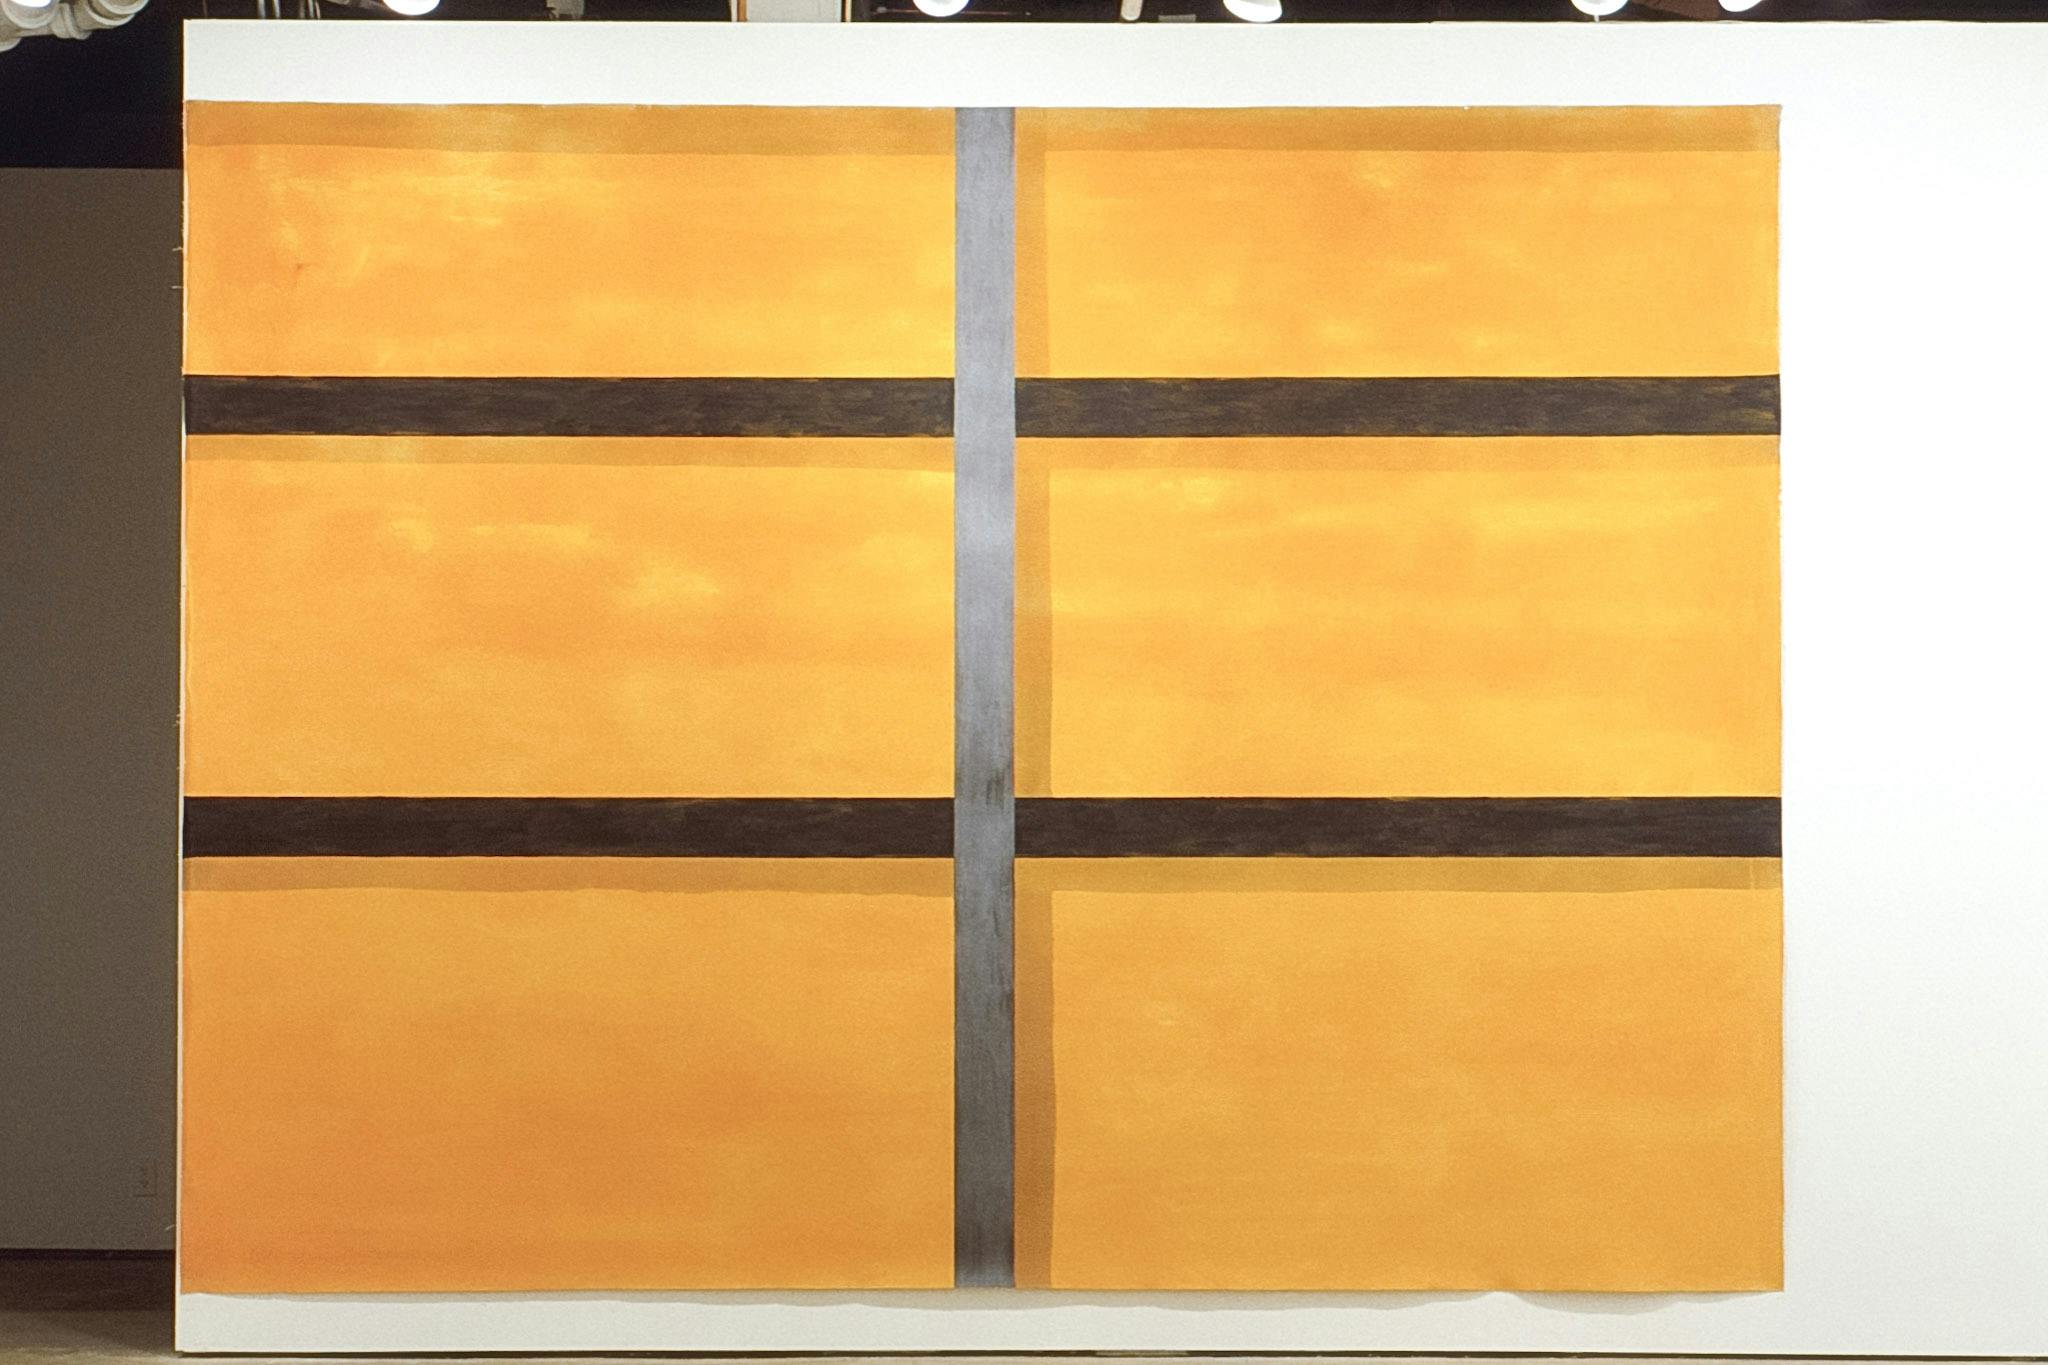 A large painting is installed on a gallery wall. The painting shows a close-up image of a grid made of two brown horizontal lines and one gray vertical line. The cells are painted in light orange. 